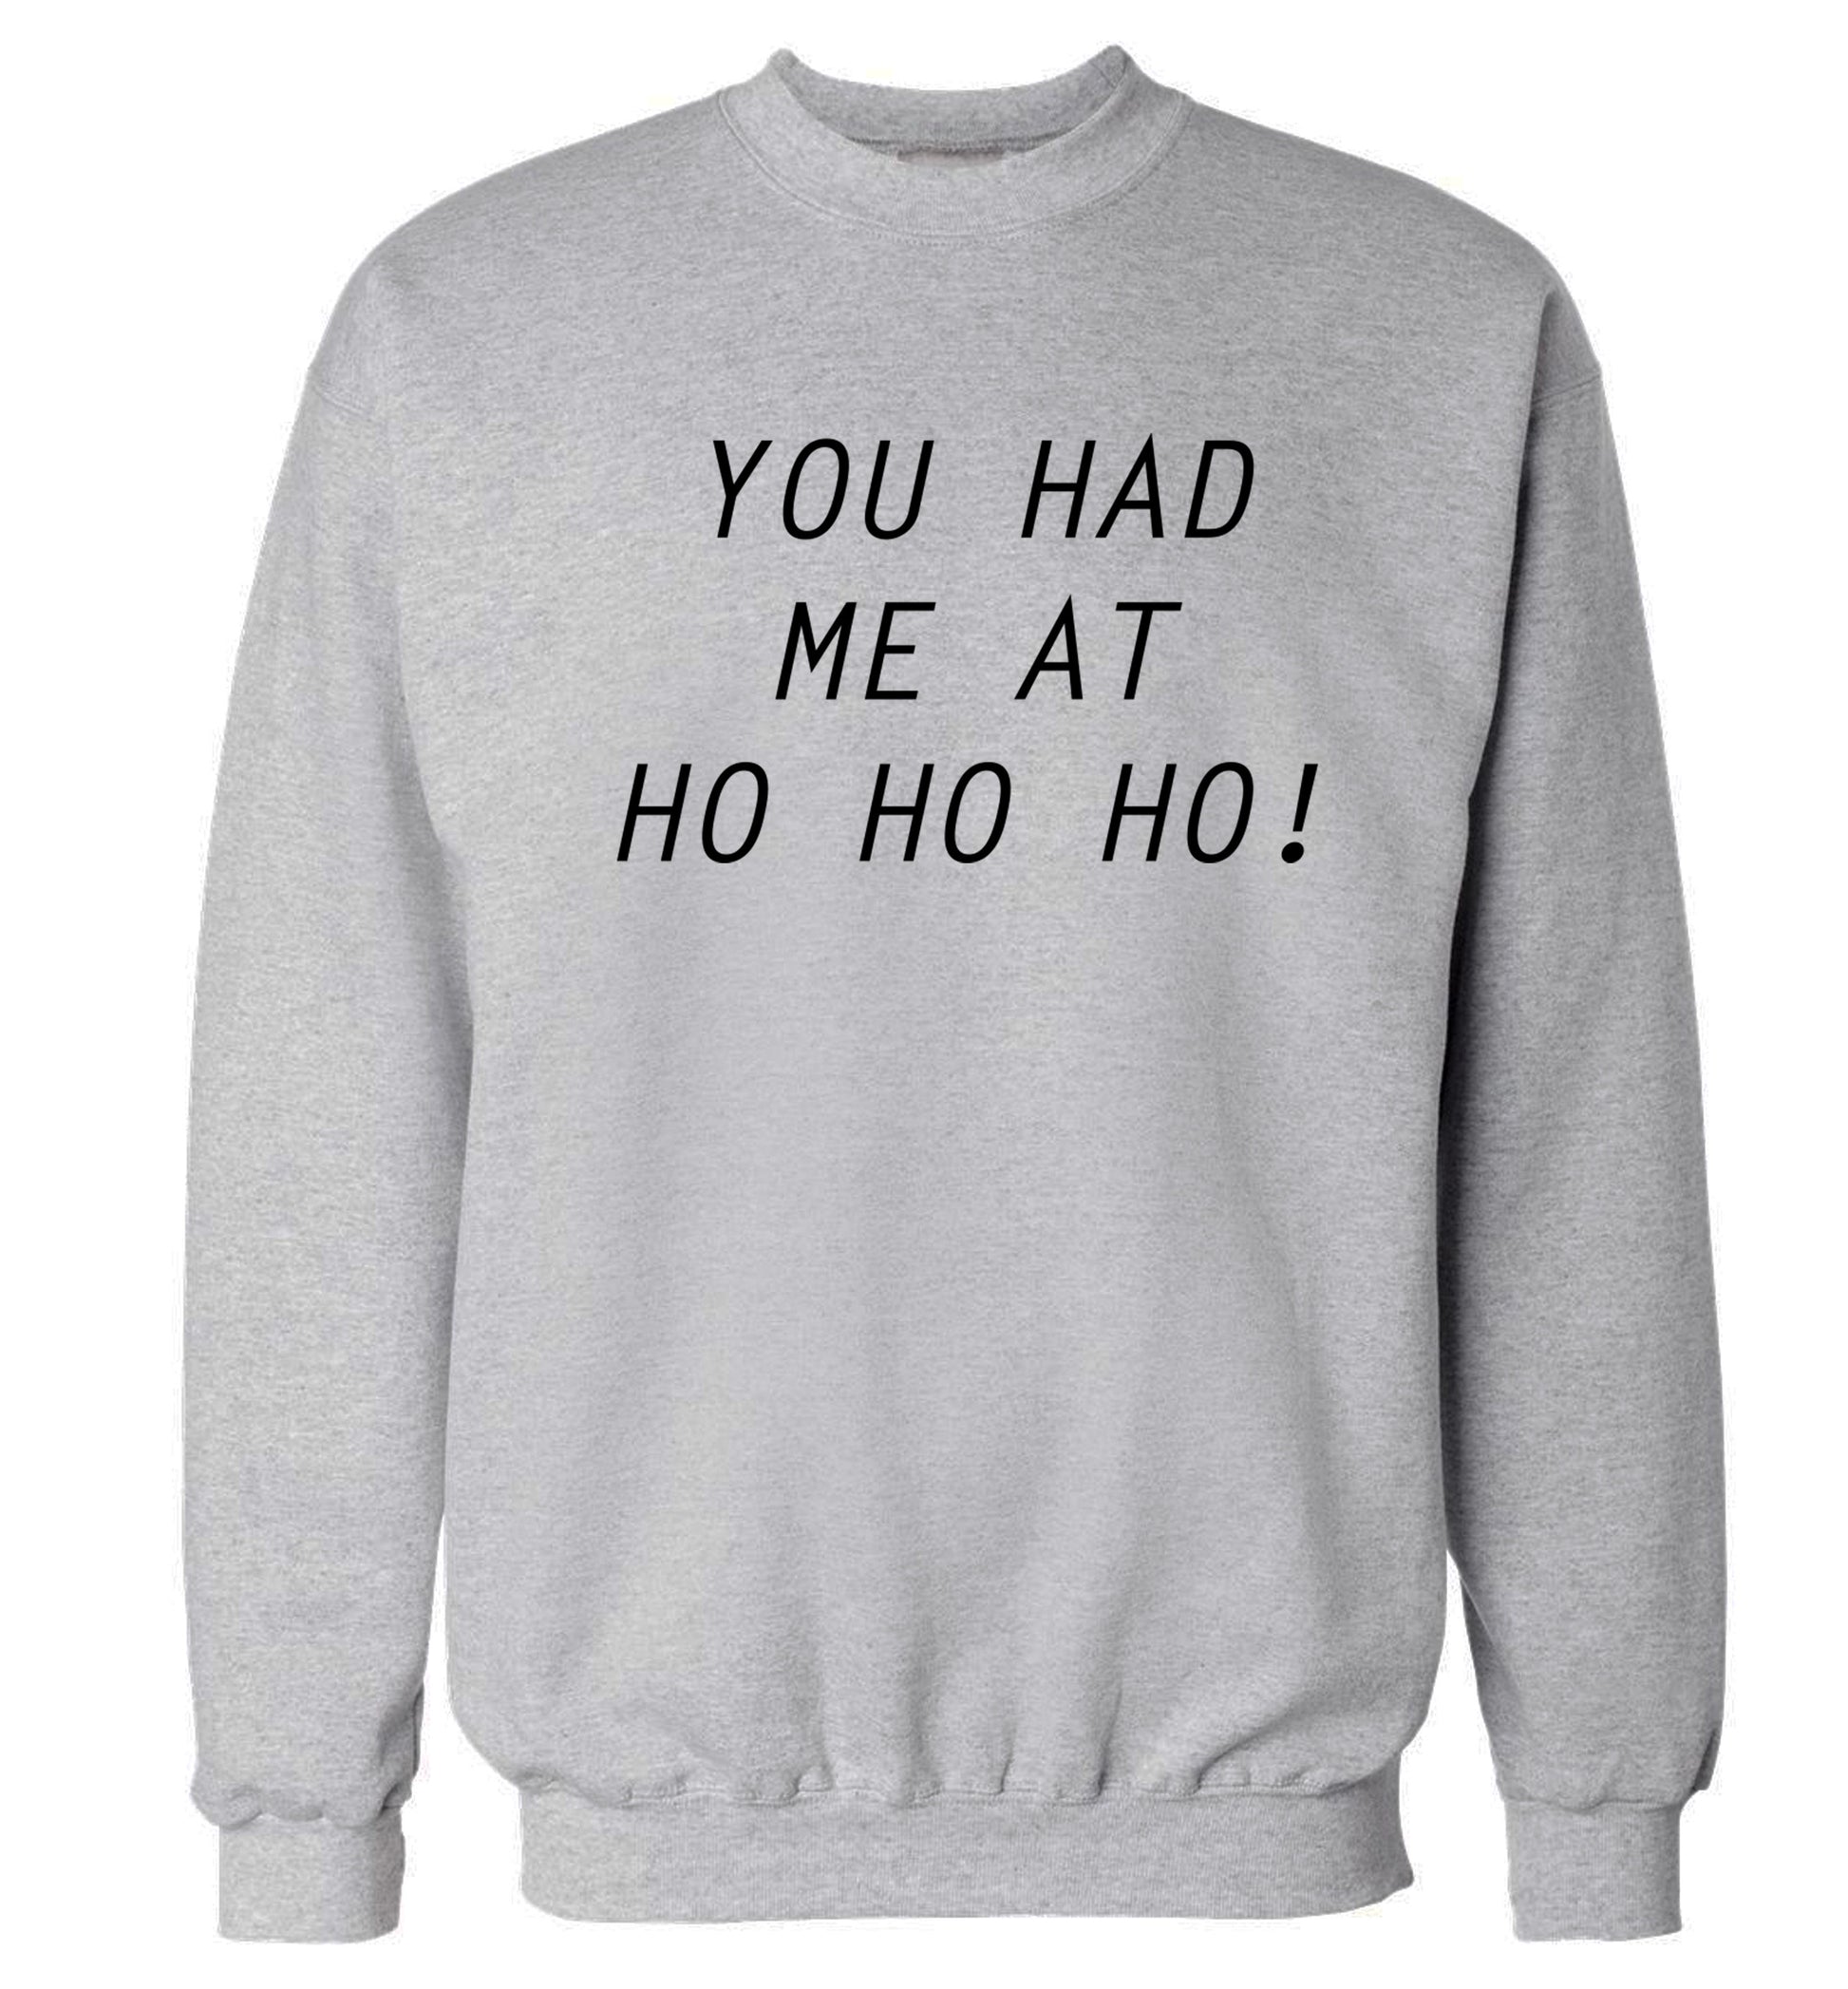 You had me at ho ho ho Adult's unisex grey Sweater 2XL